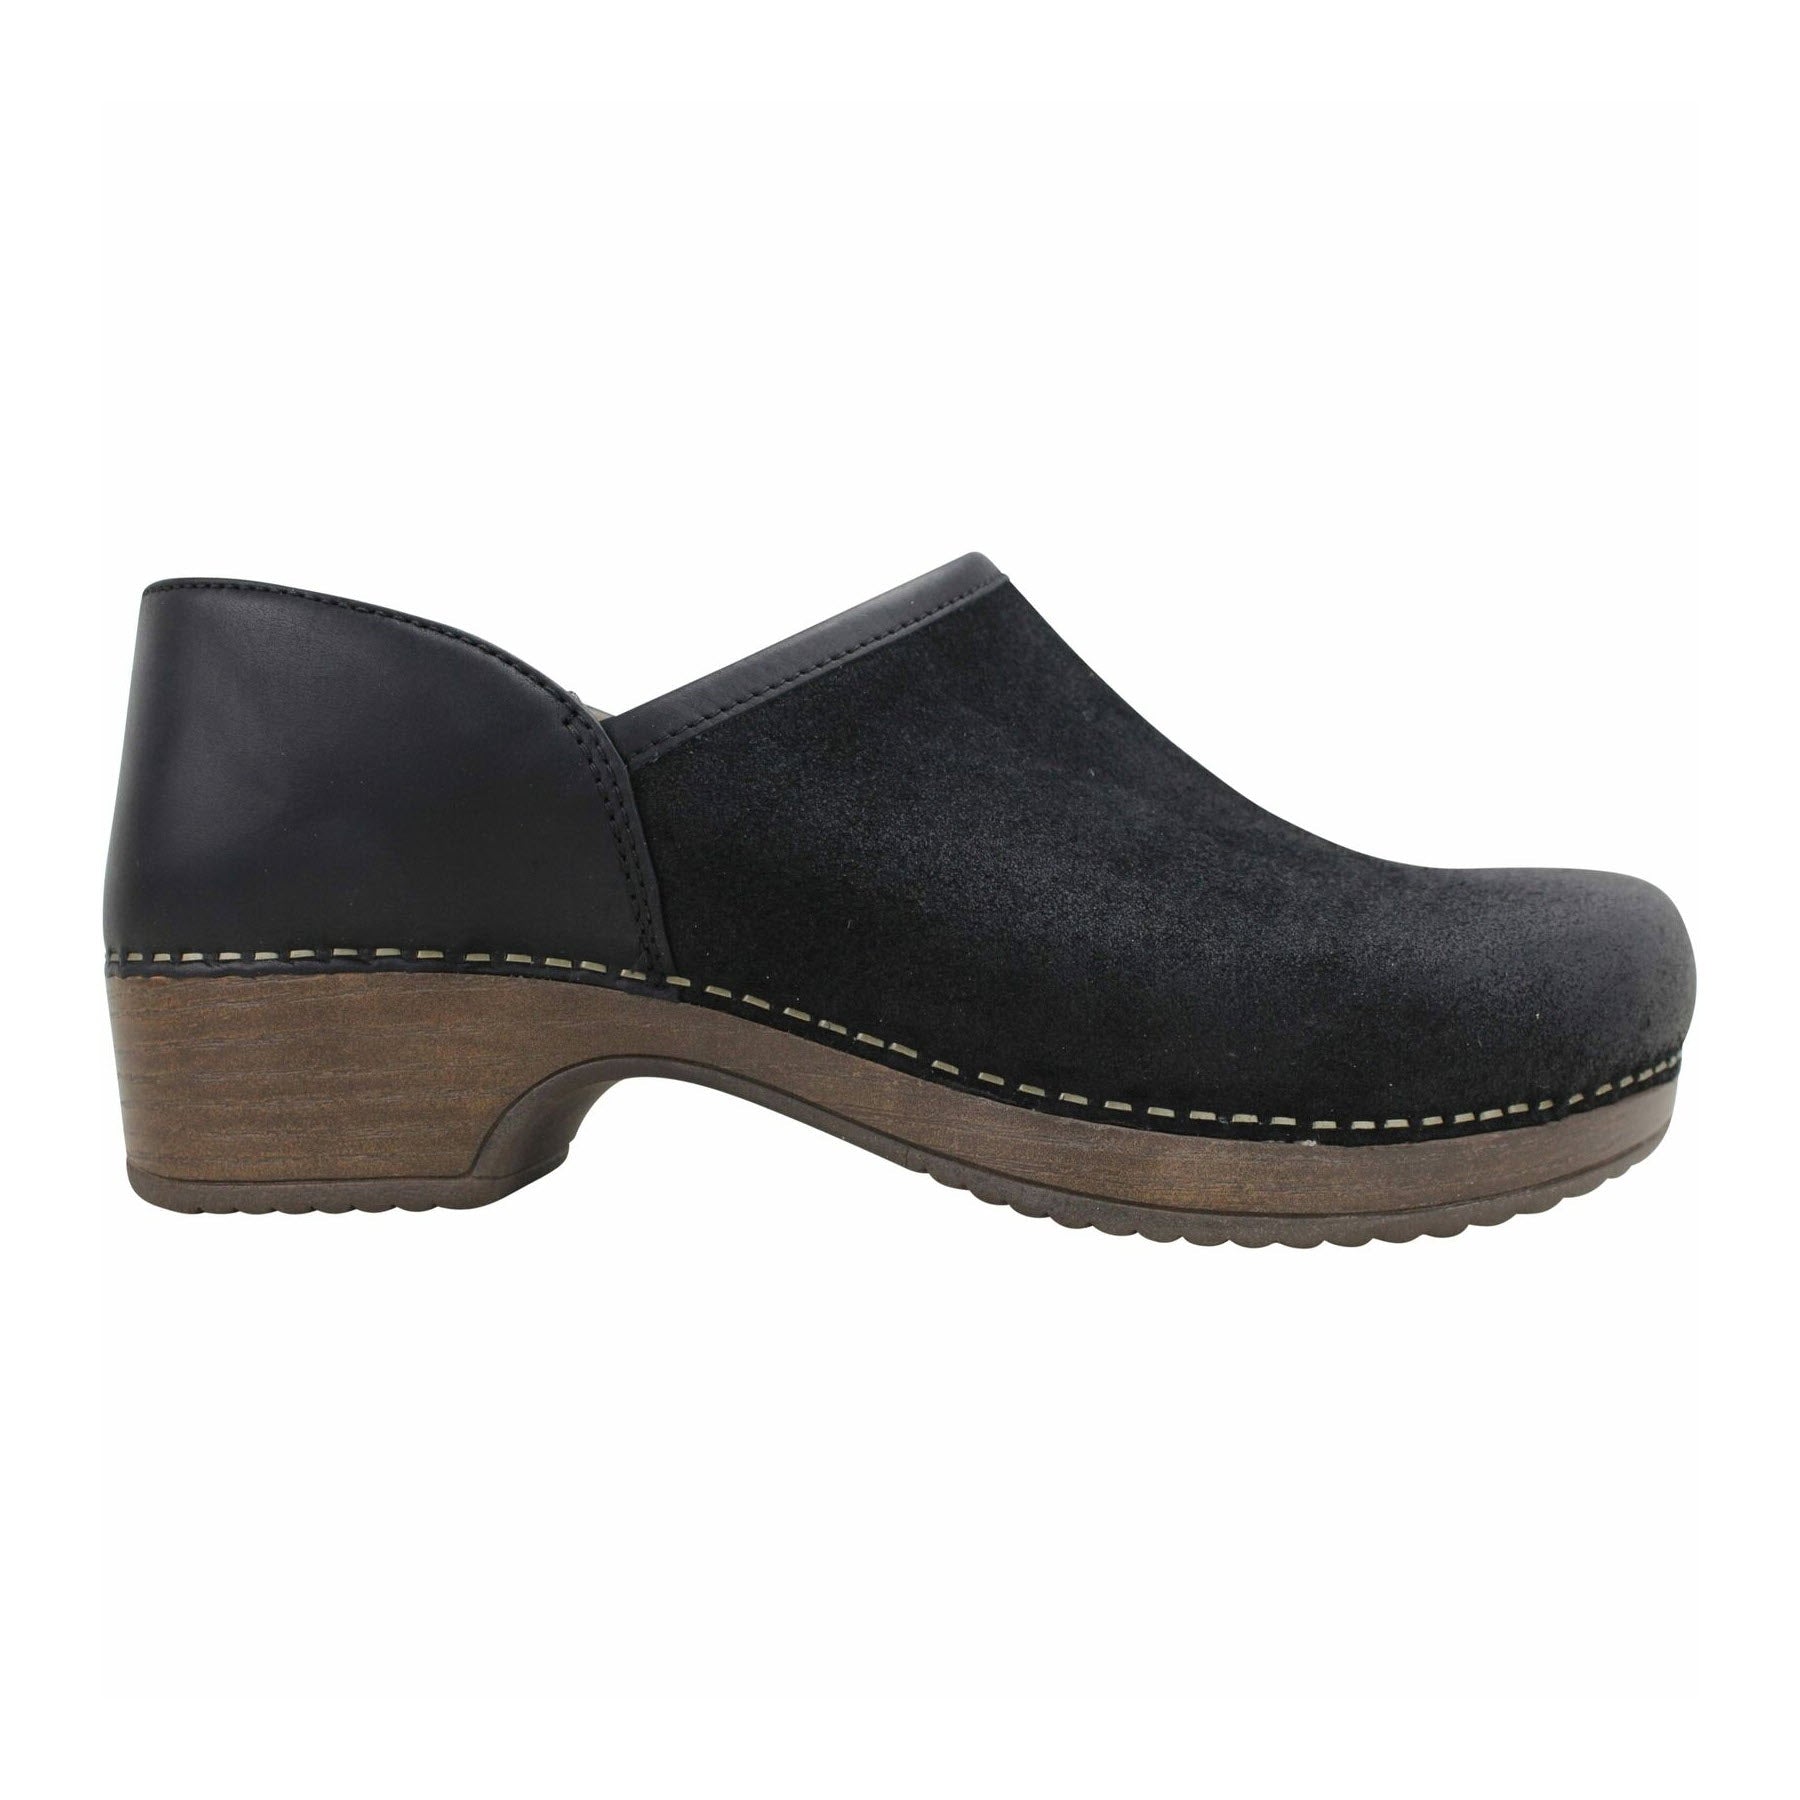 Dansko black burnished suede slip-on shoe with a wooden sole and low heel, featuring Dansko Brenna's signature stain resistance.